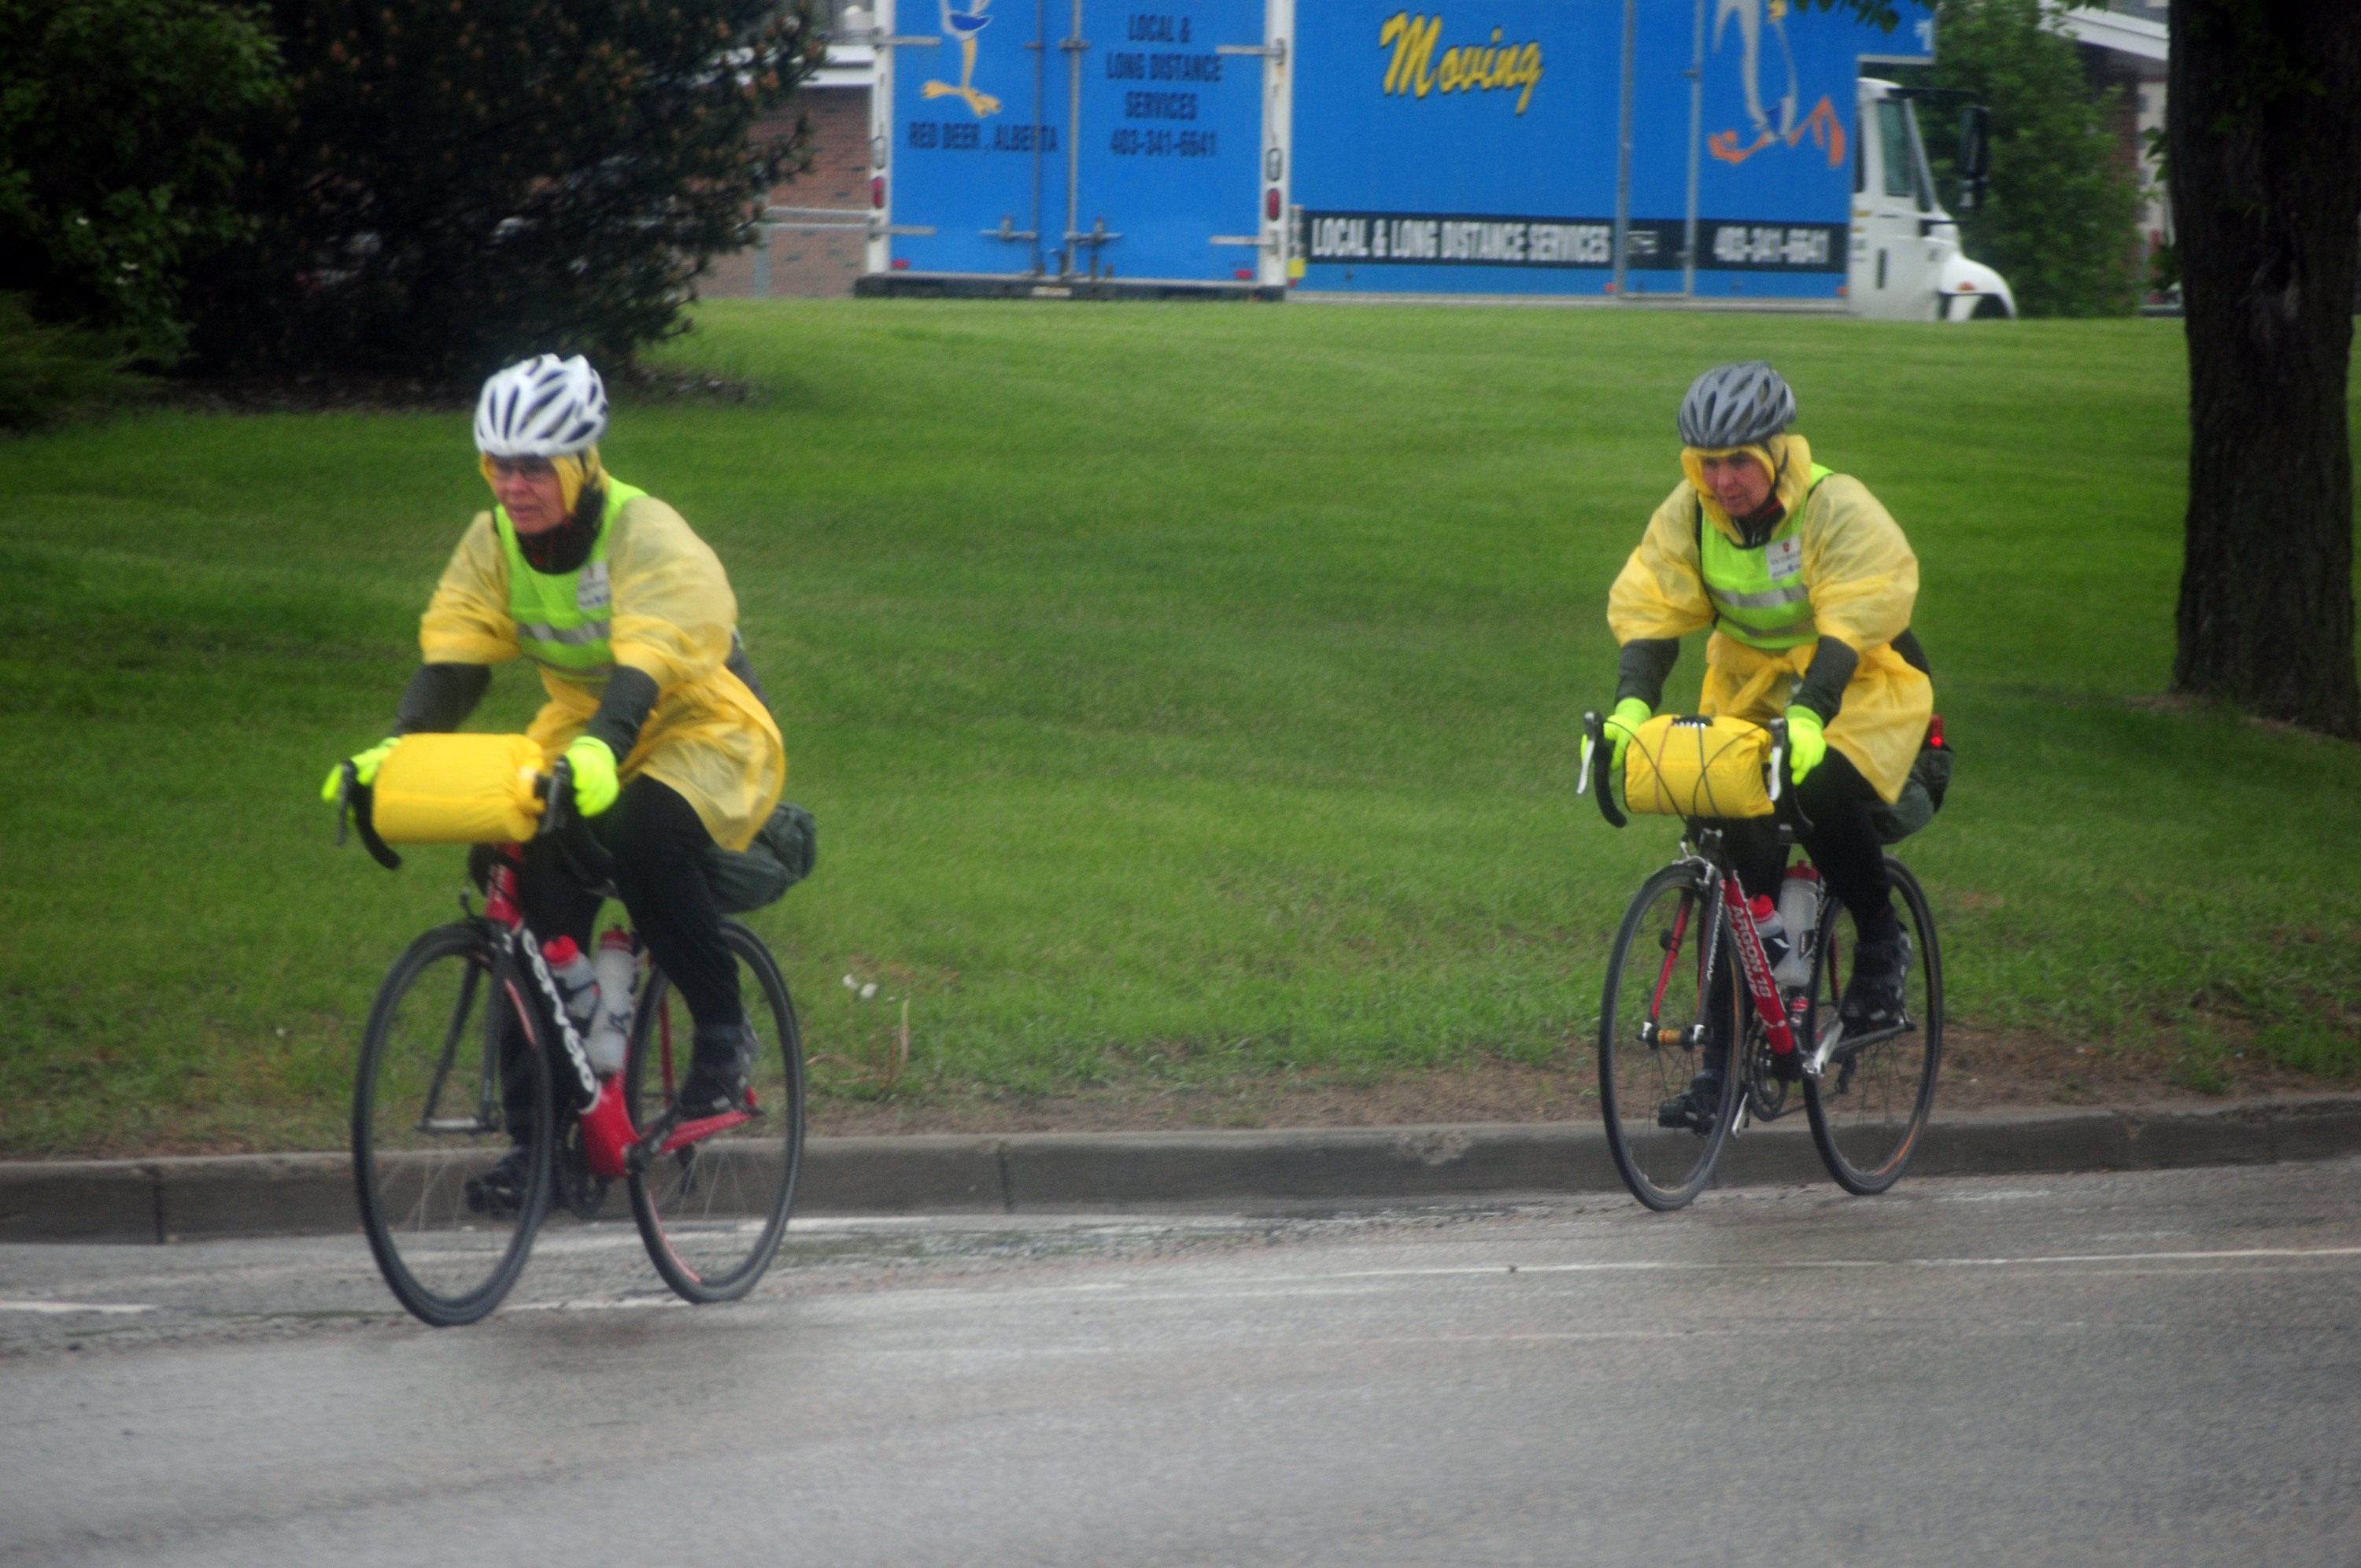 WET RIDE- Two pedal bikers braved the rain Saturday morning along 67 St. despite the continuous downpour.